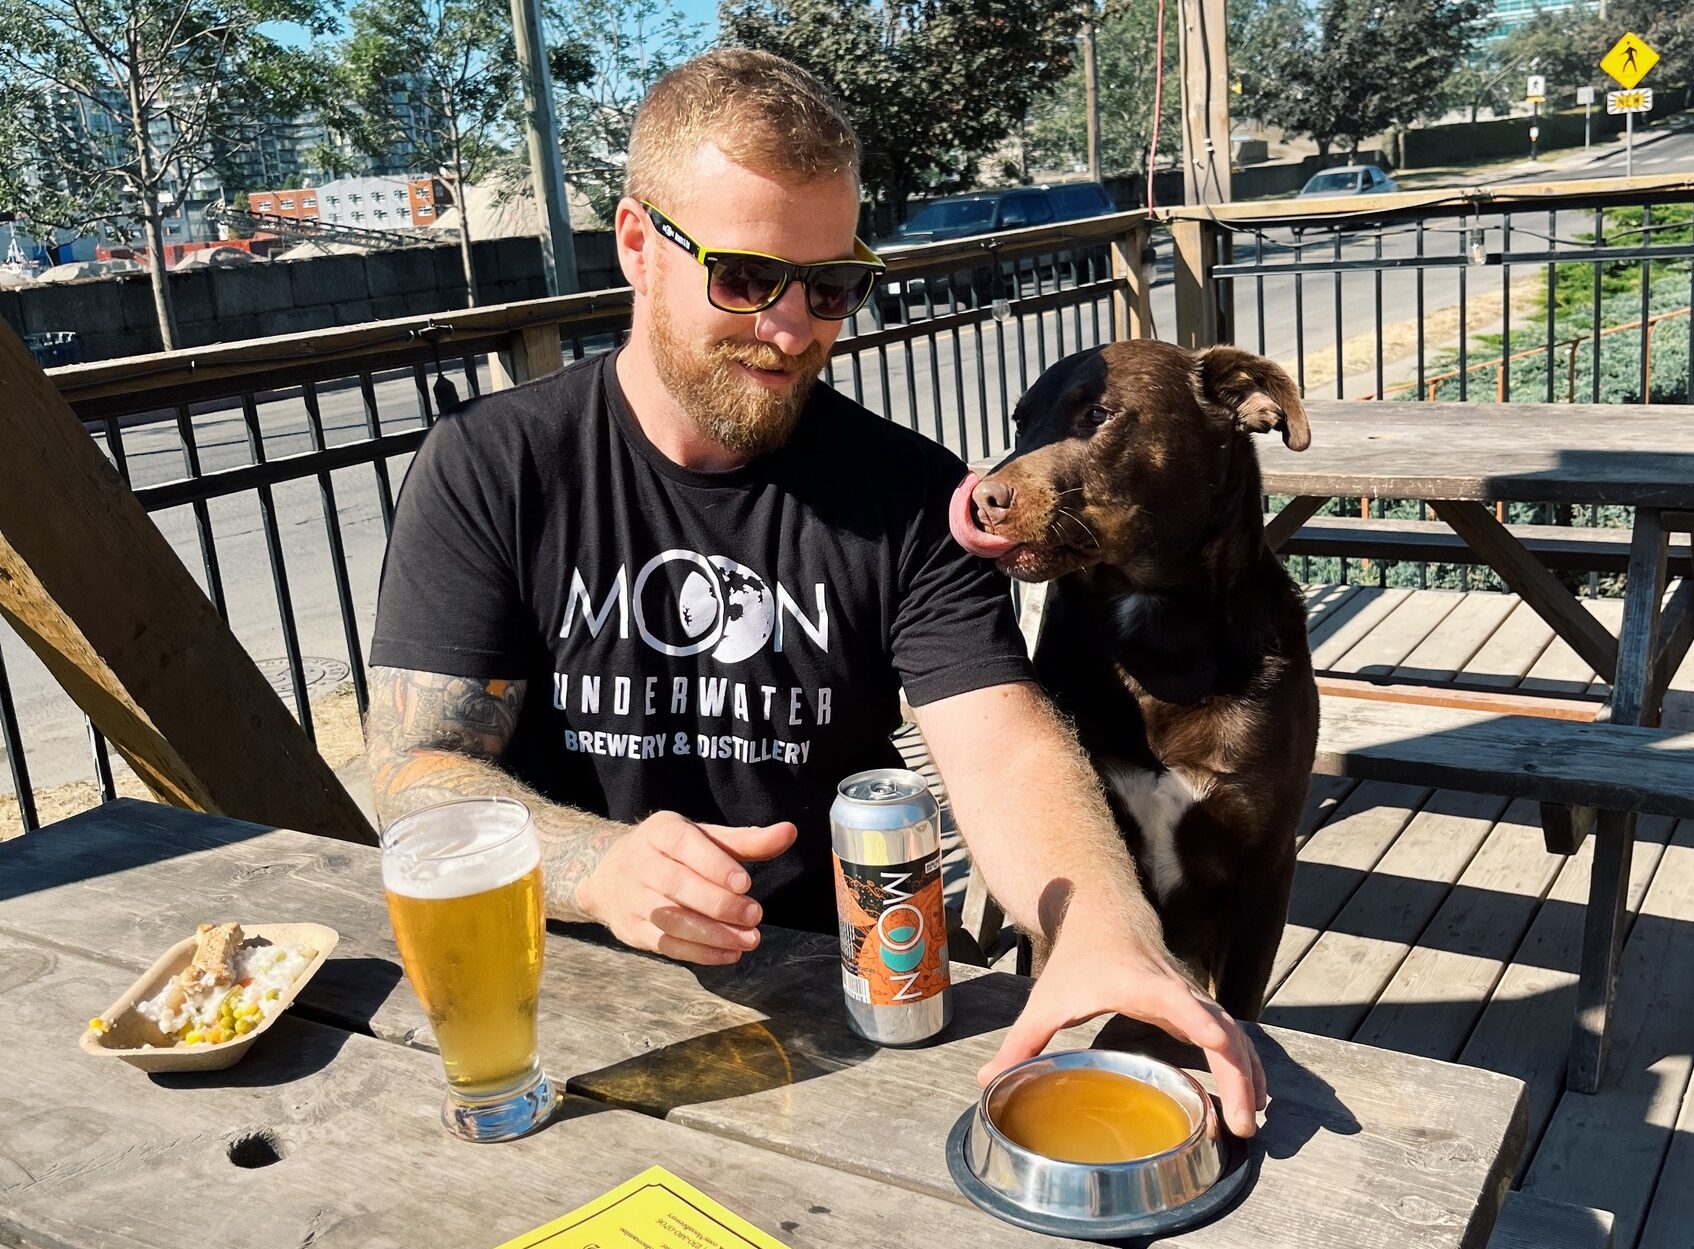 17 dog-friendly patios in downtown Victoria to check out this Easter weekend